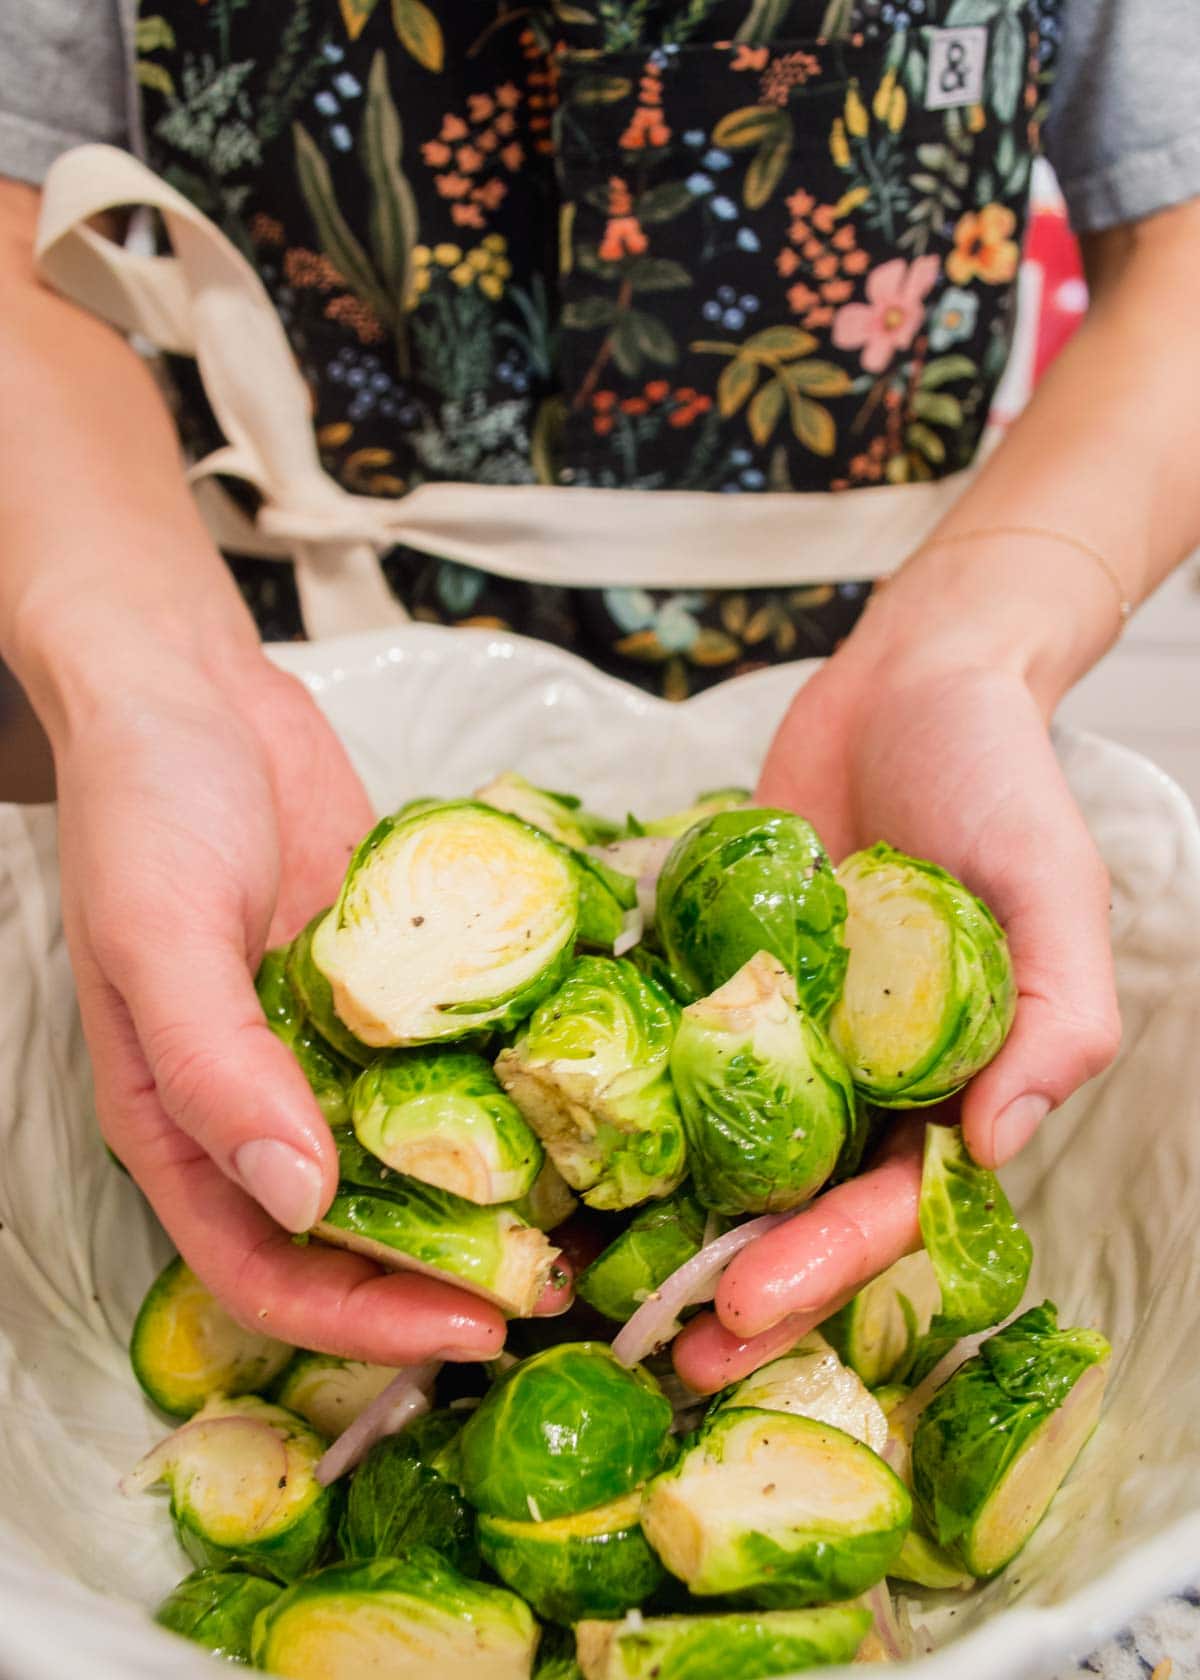 Hands in Maple Brussel Sprouts with seasoning.